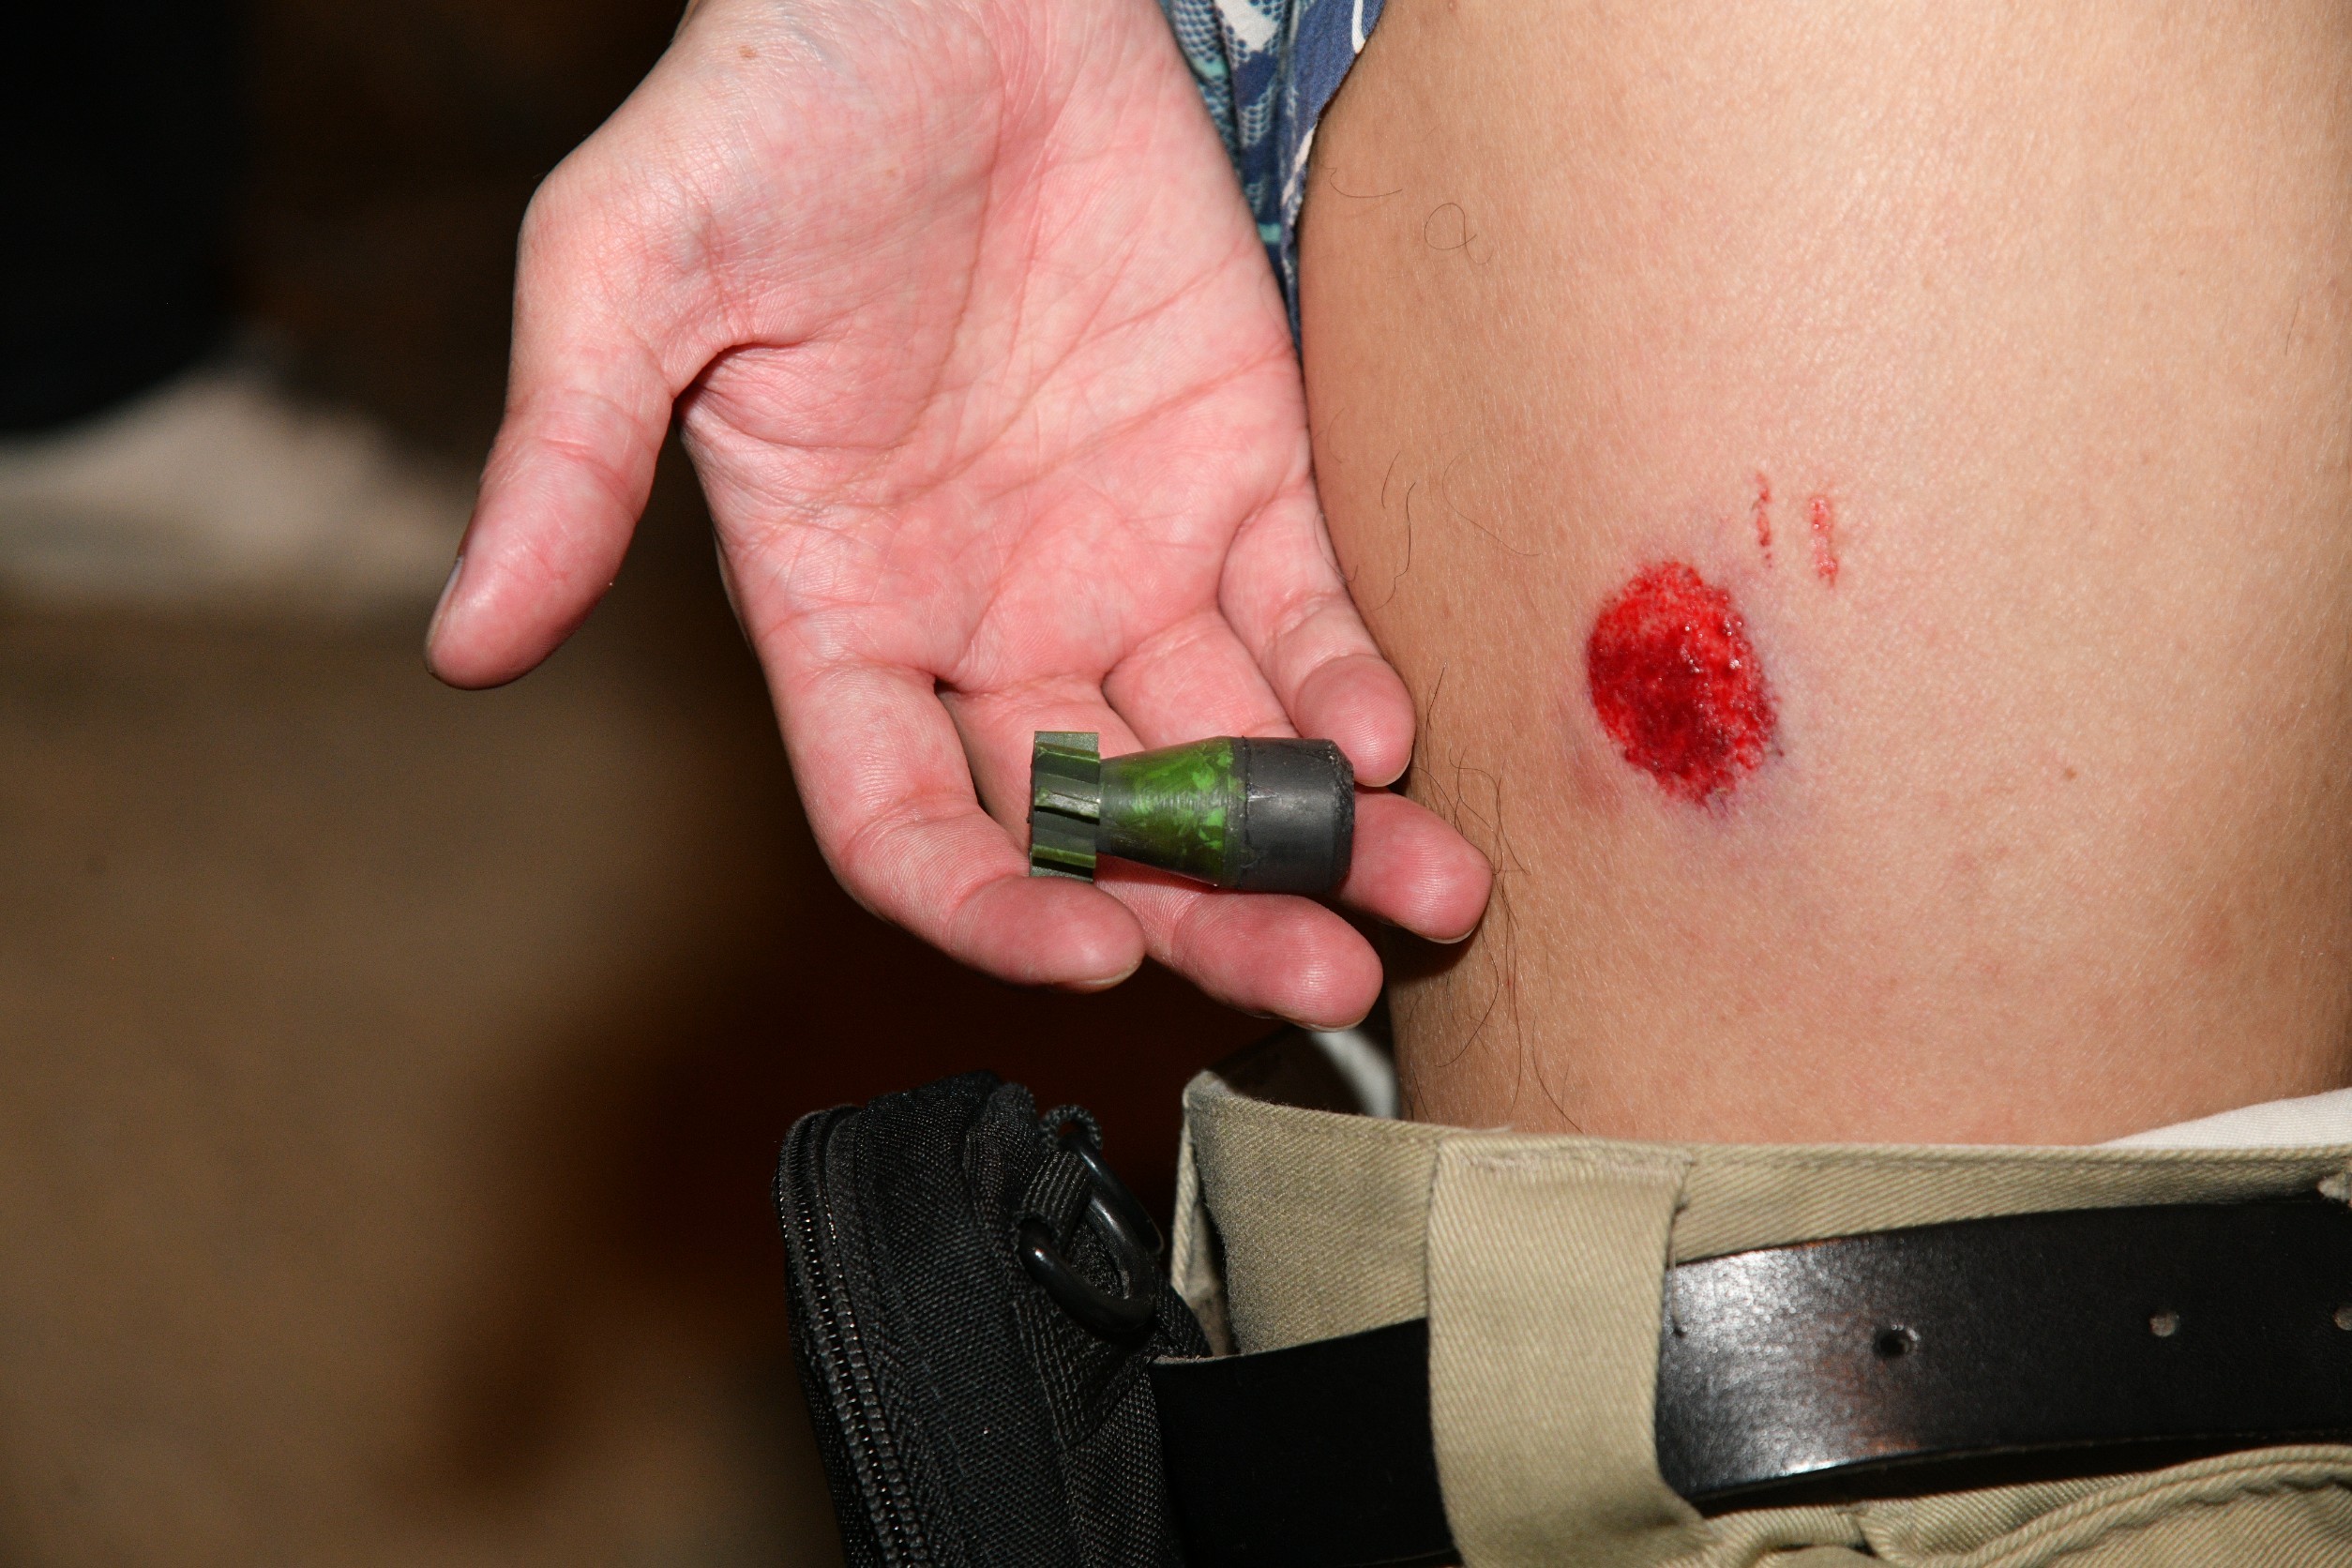 A demonstrator shows a wound caused by a rubber bullet.